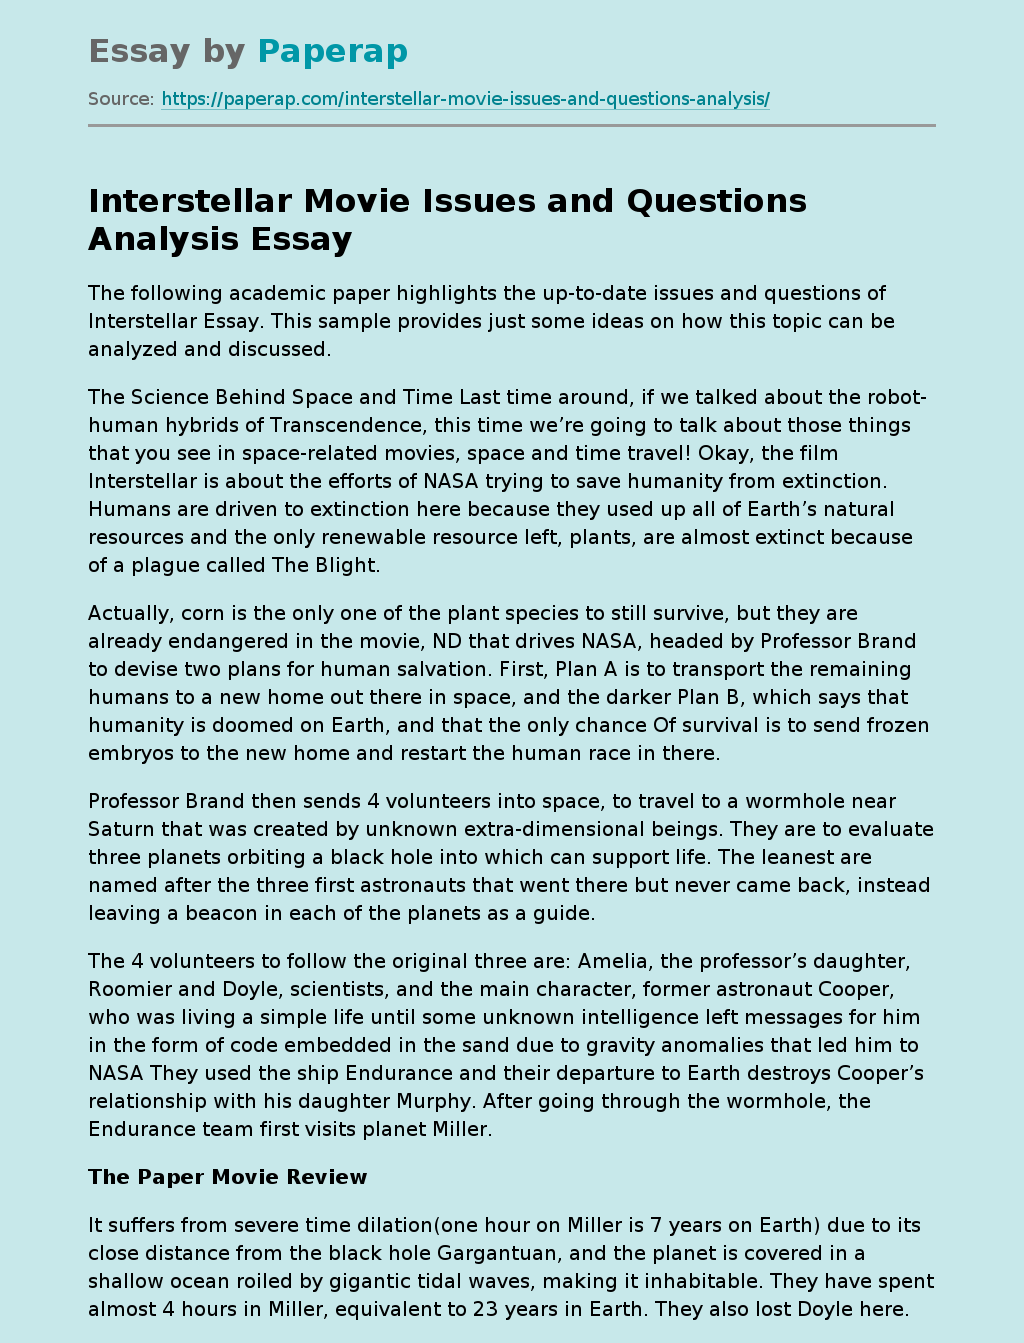 Interstellar Movie Issues and Questions Analysis